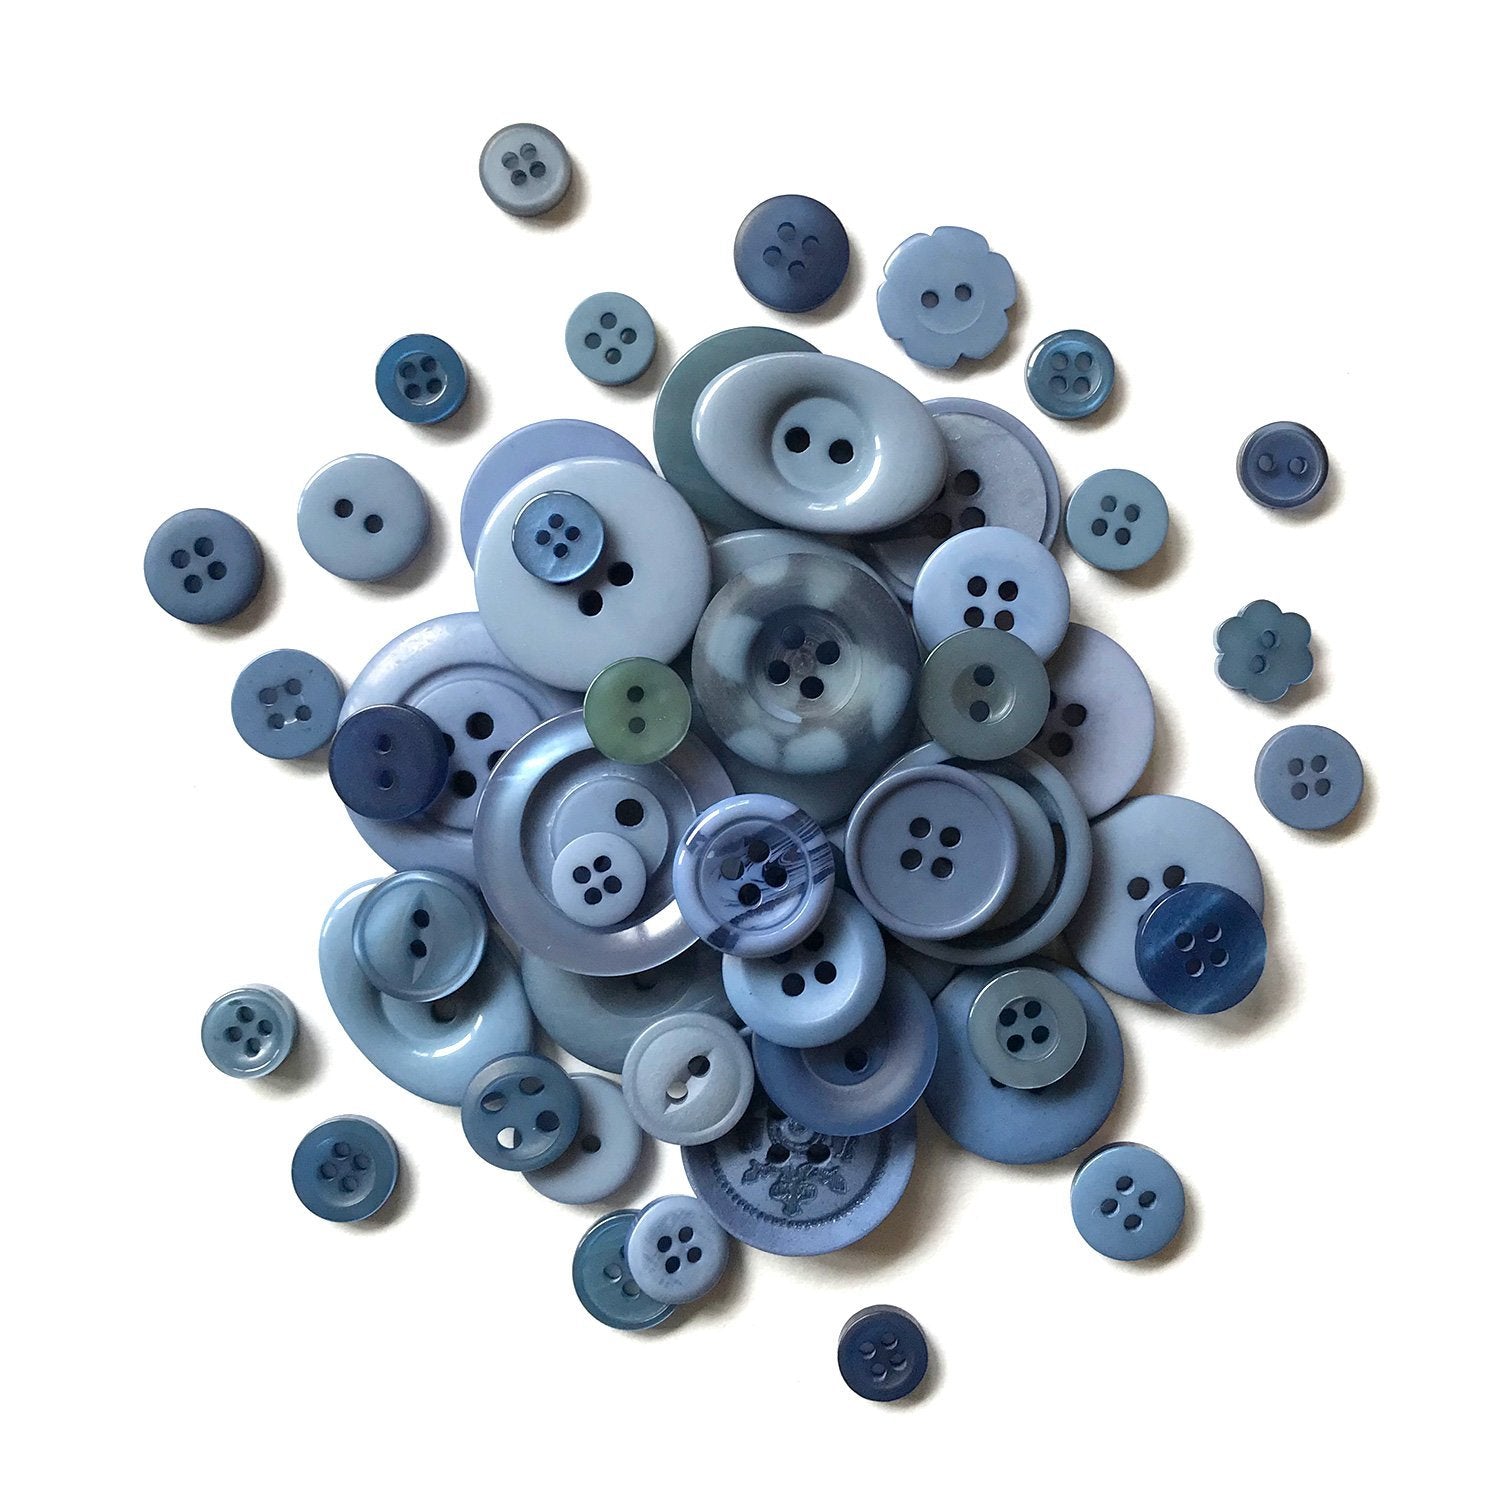 Brown Bulk Buttons for Sewing & Button Crafts, Buttons Galore & More